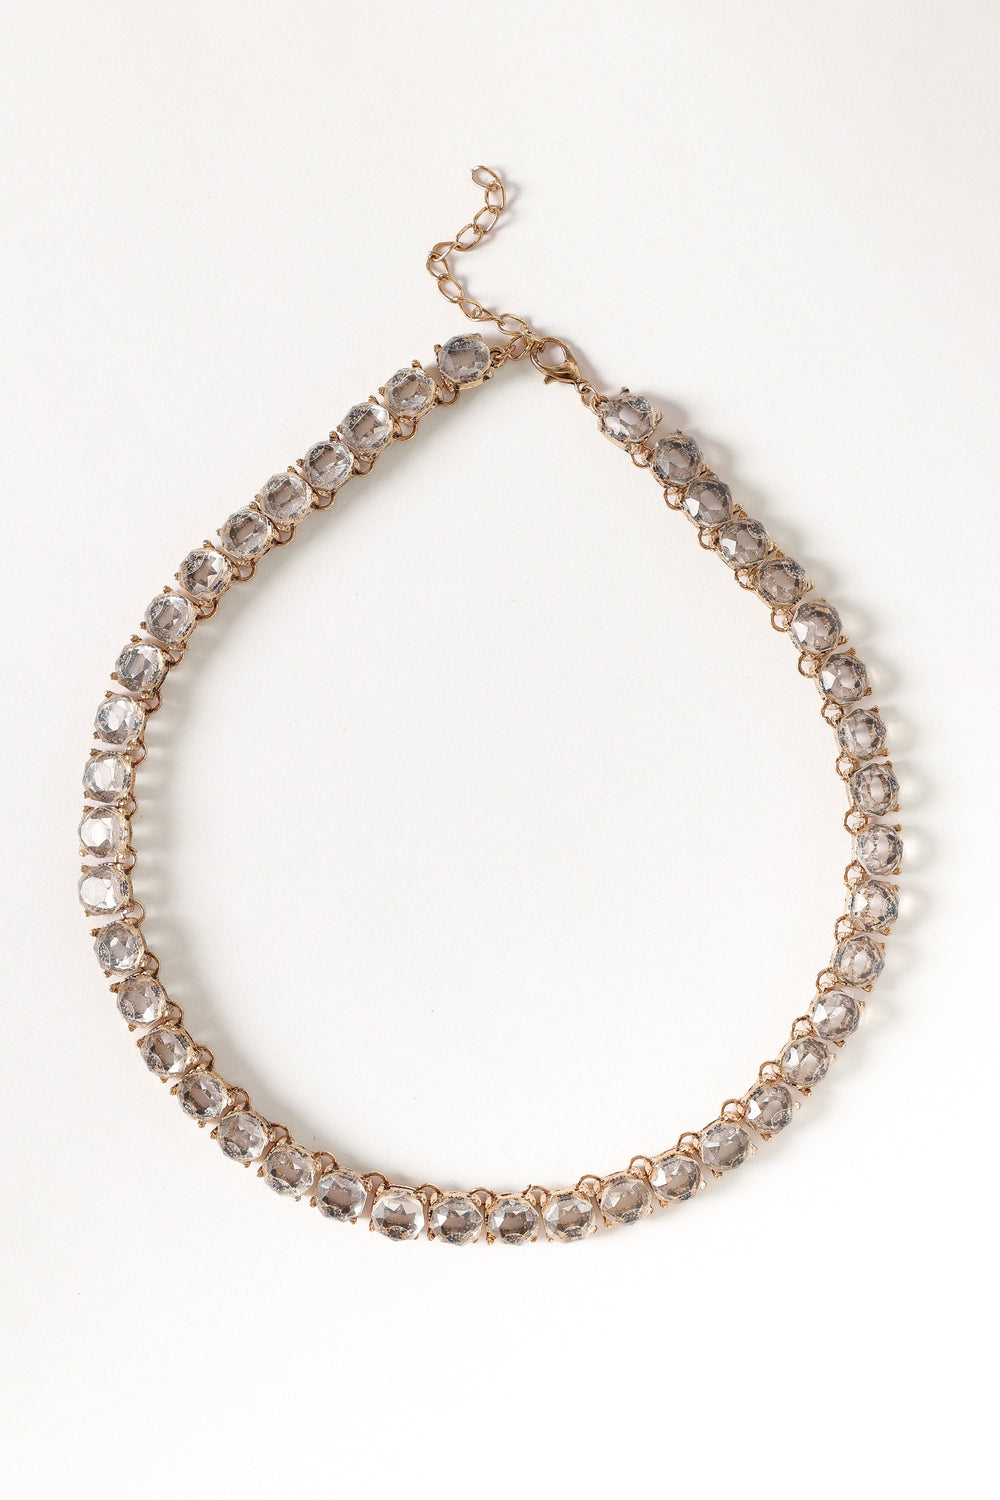 ACCESSORIES Brynne Necklace - Gold